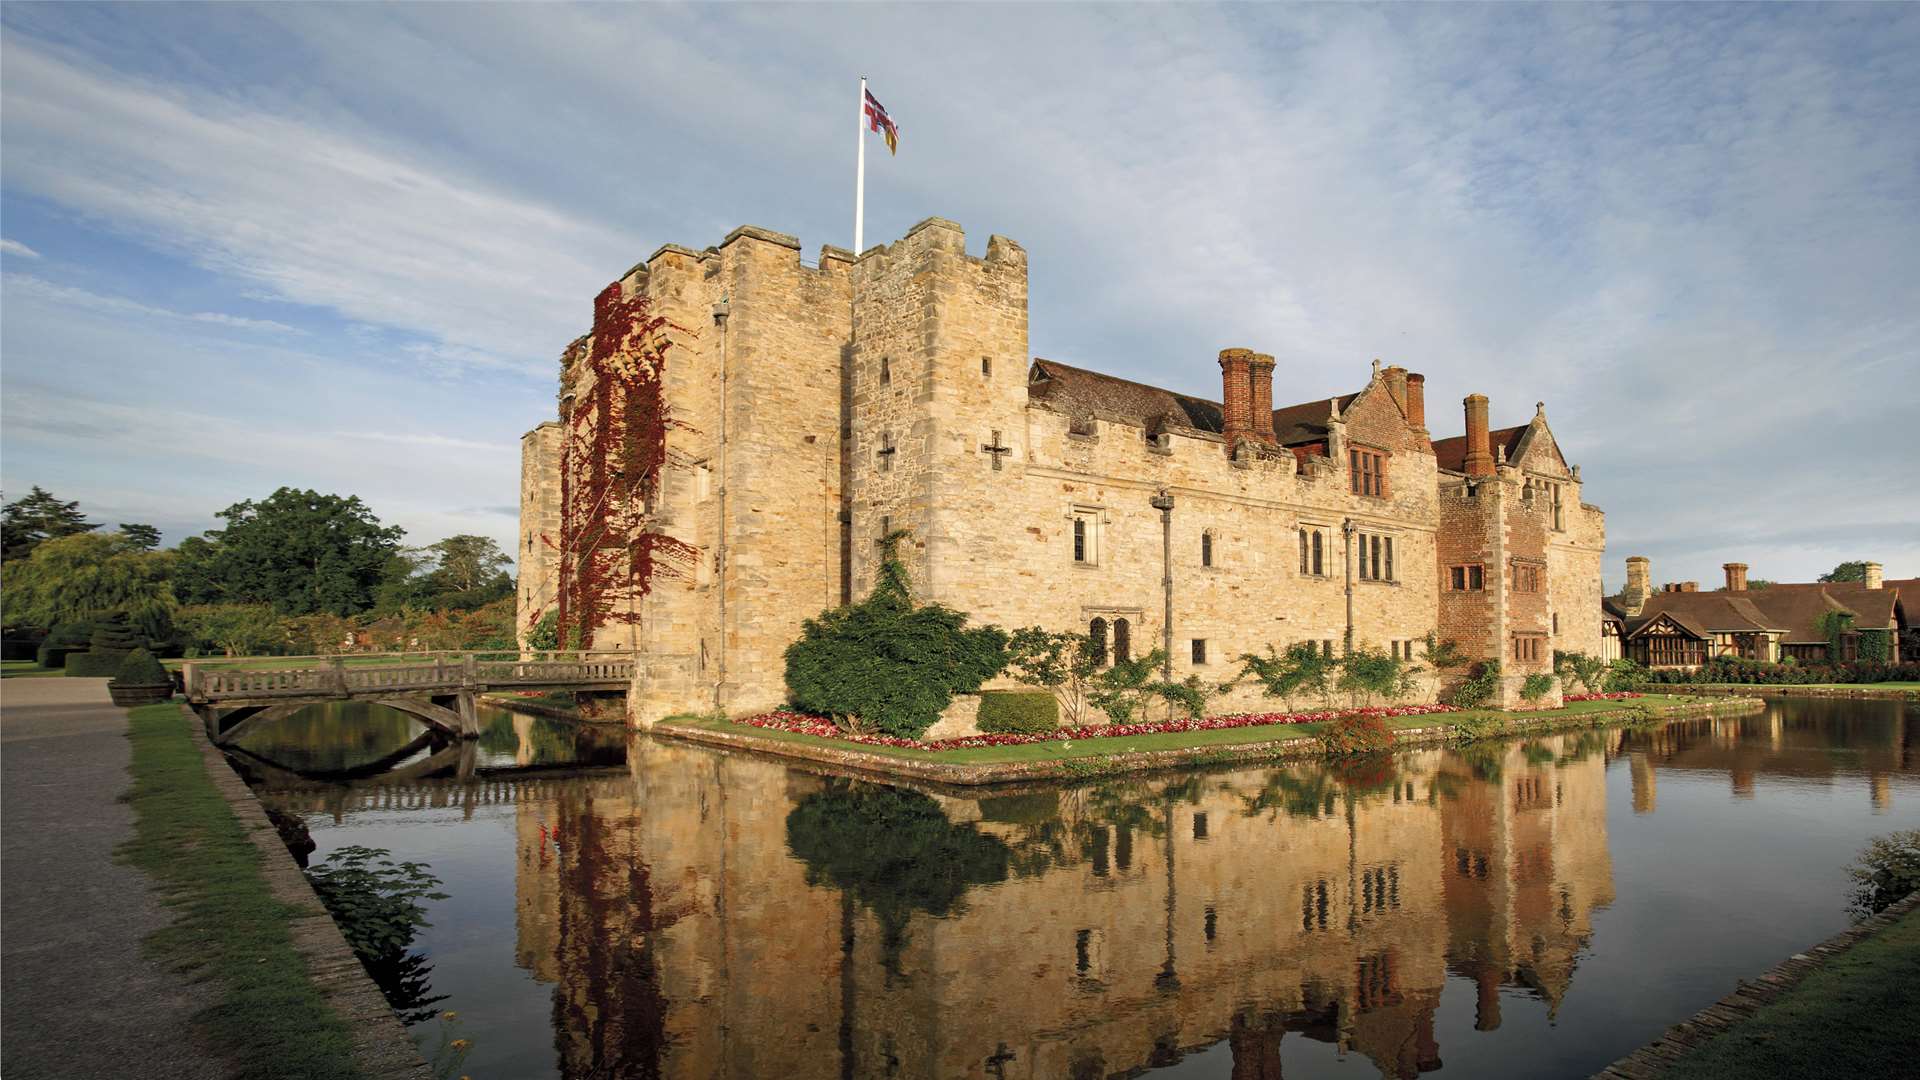 Hever Castle has been presented with a certificate of excellence